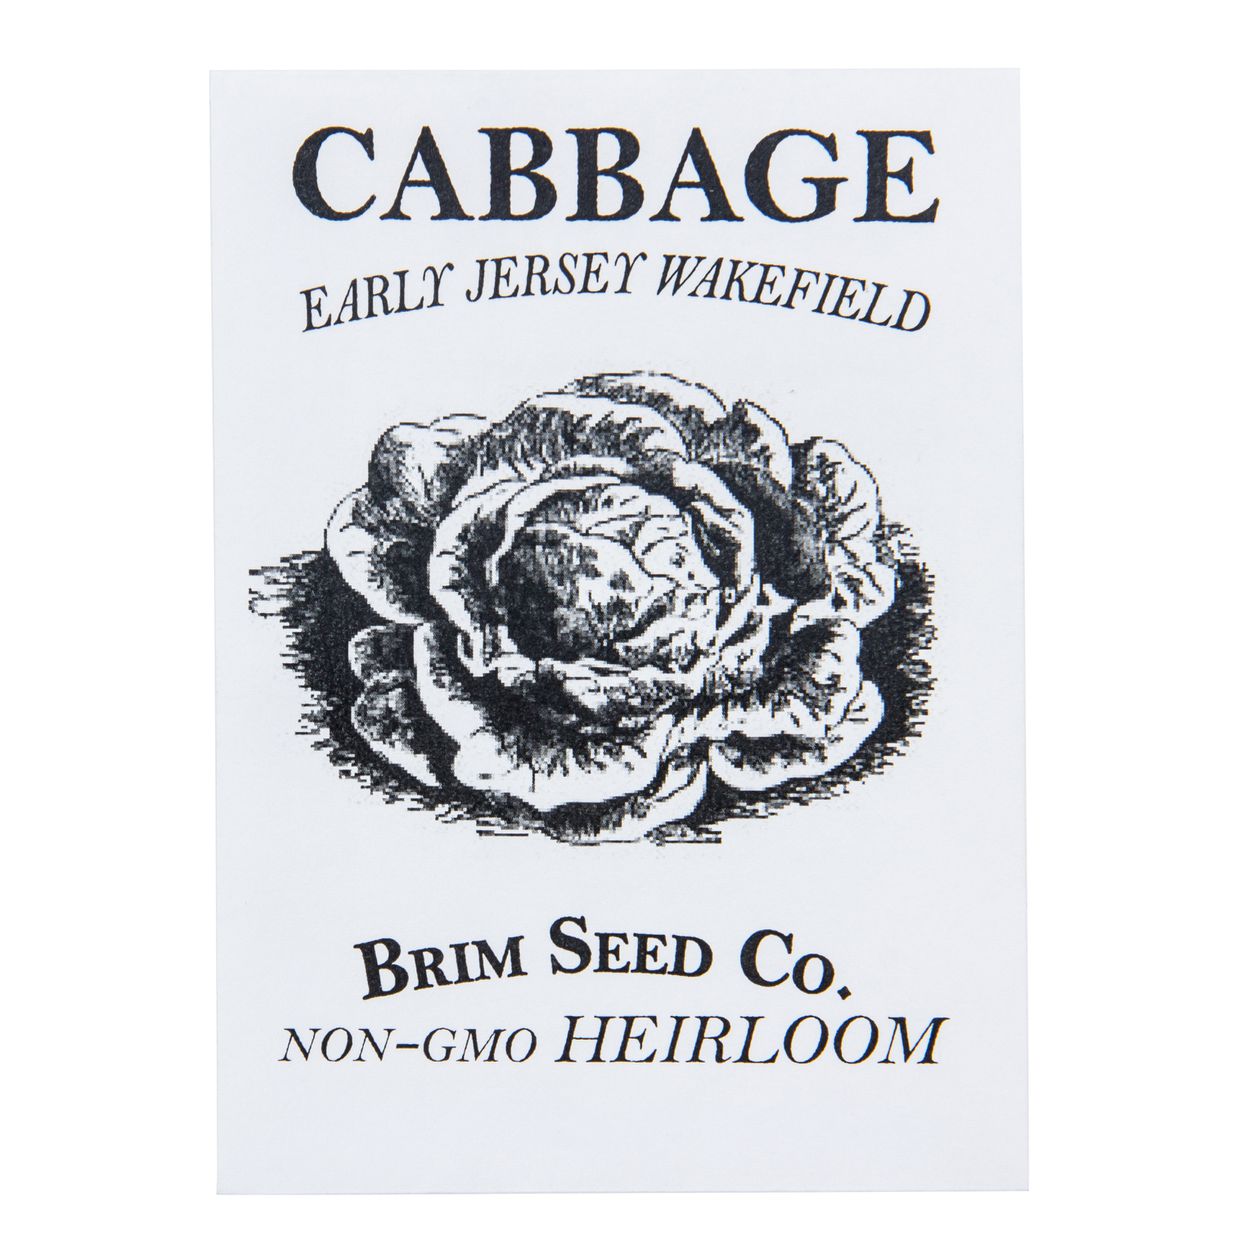 Brim Seed Co. - Early Jersey Wakefield Cabbage Heirloom Seed